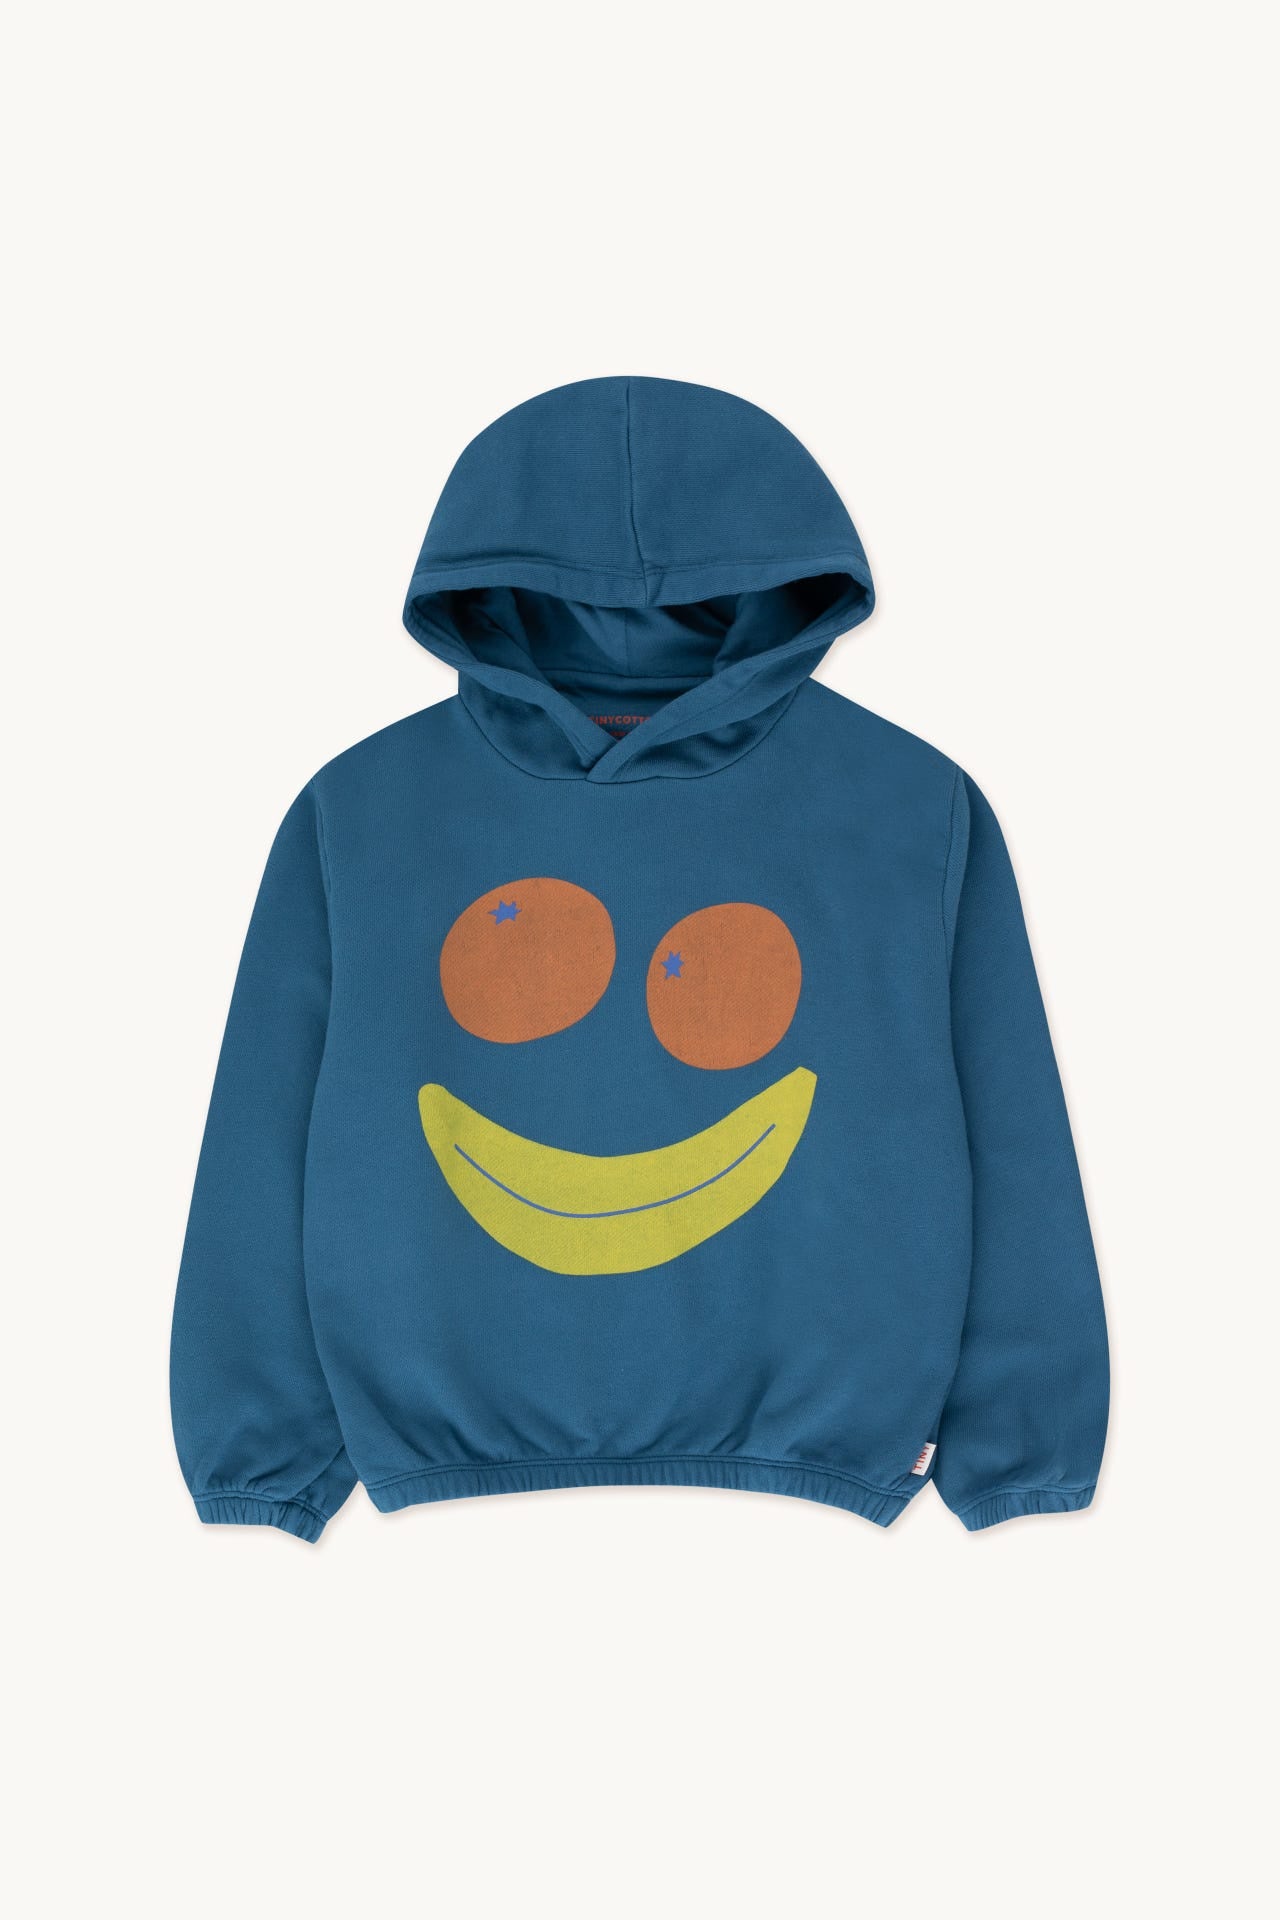 TINYCOTTONS SMILE HOODIE *light navy*